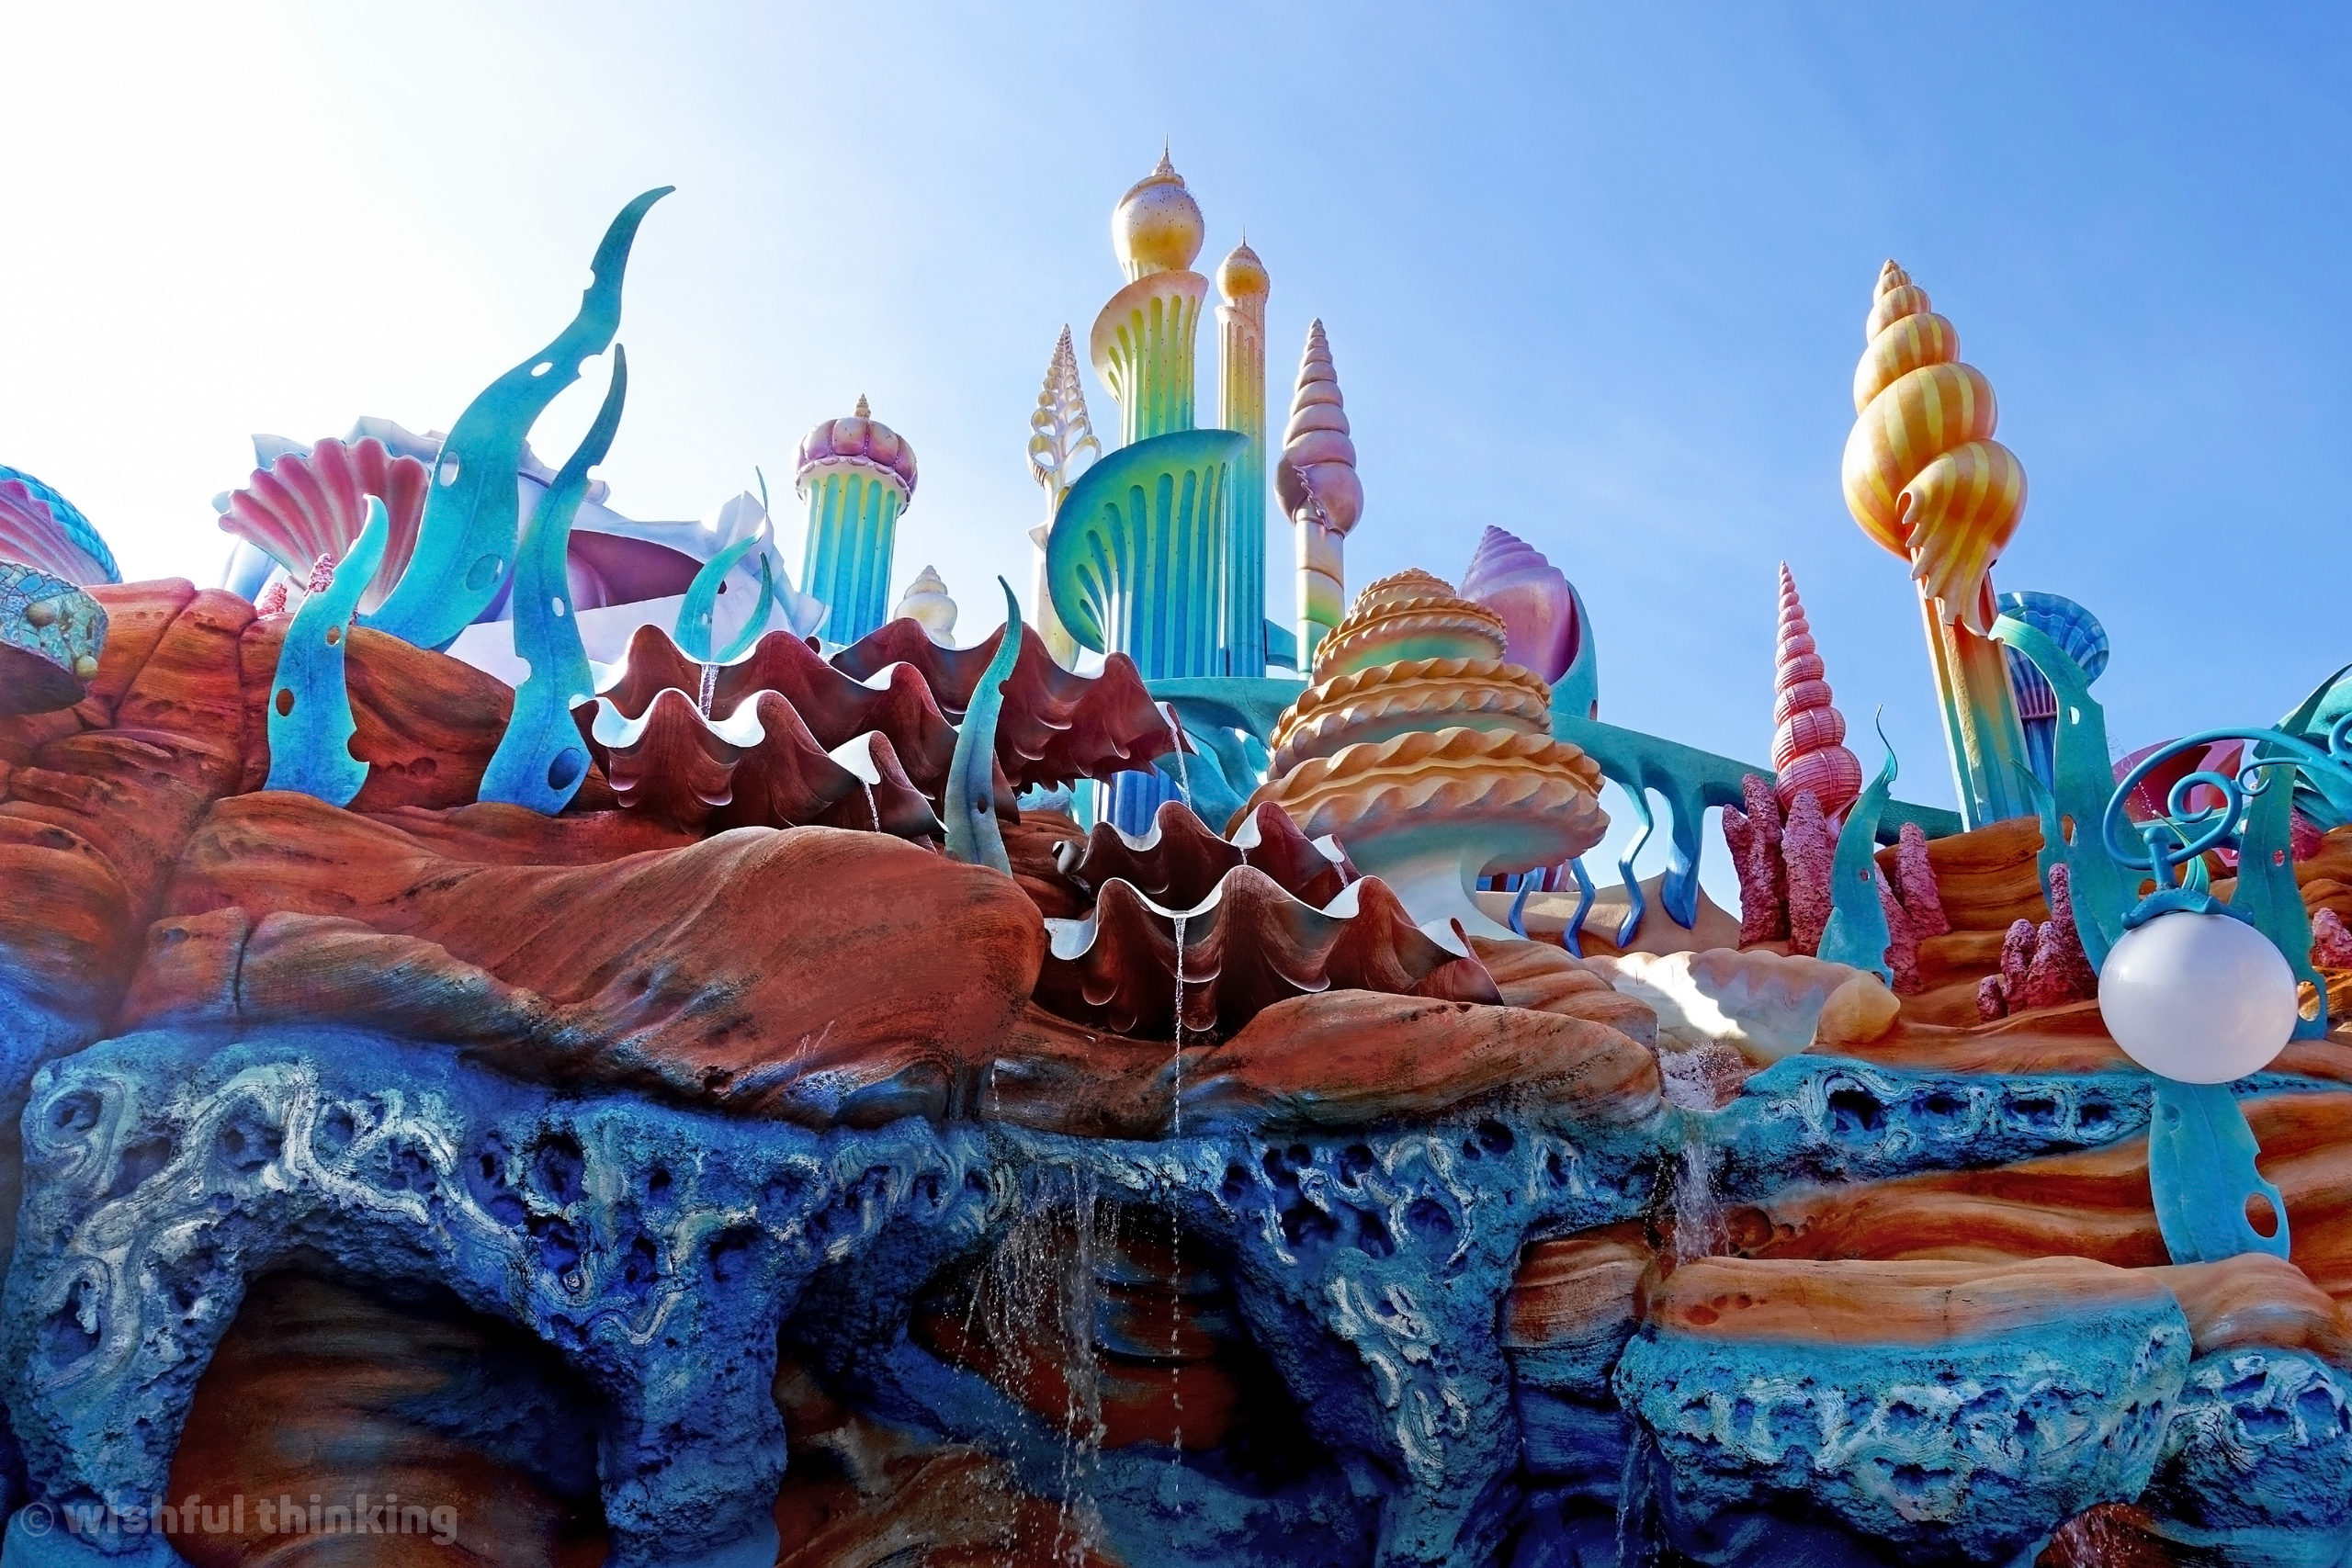 Ariel herself couldn't have had it better down where it's wetter! Coral spires and cascading waterfalls of Mermaid Lagoon at Tokyo Disney Sea in Japan